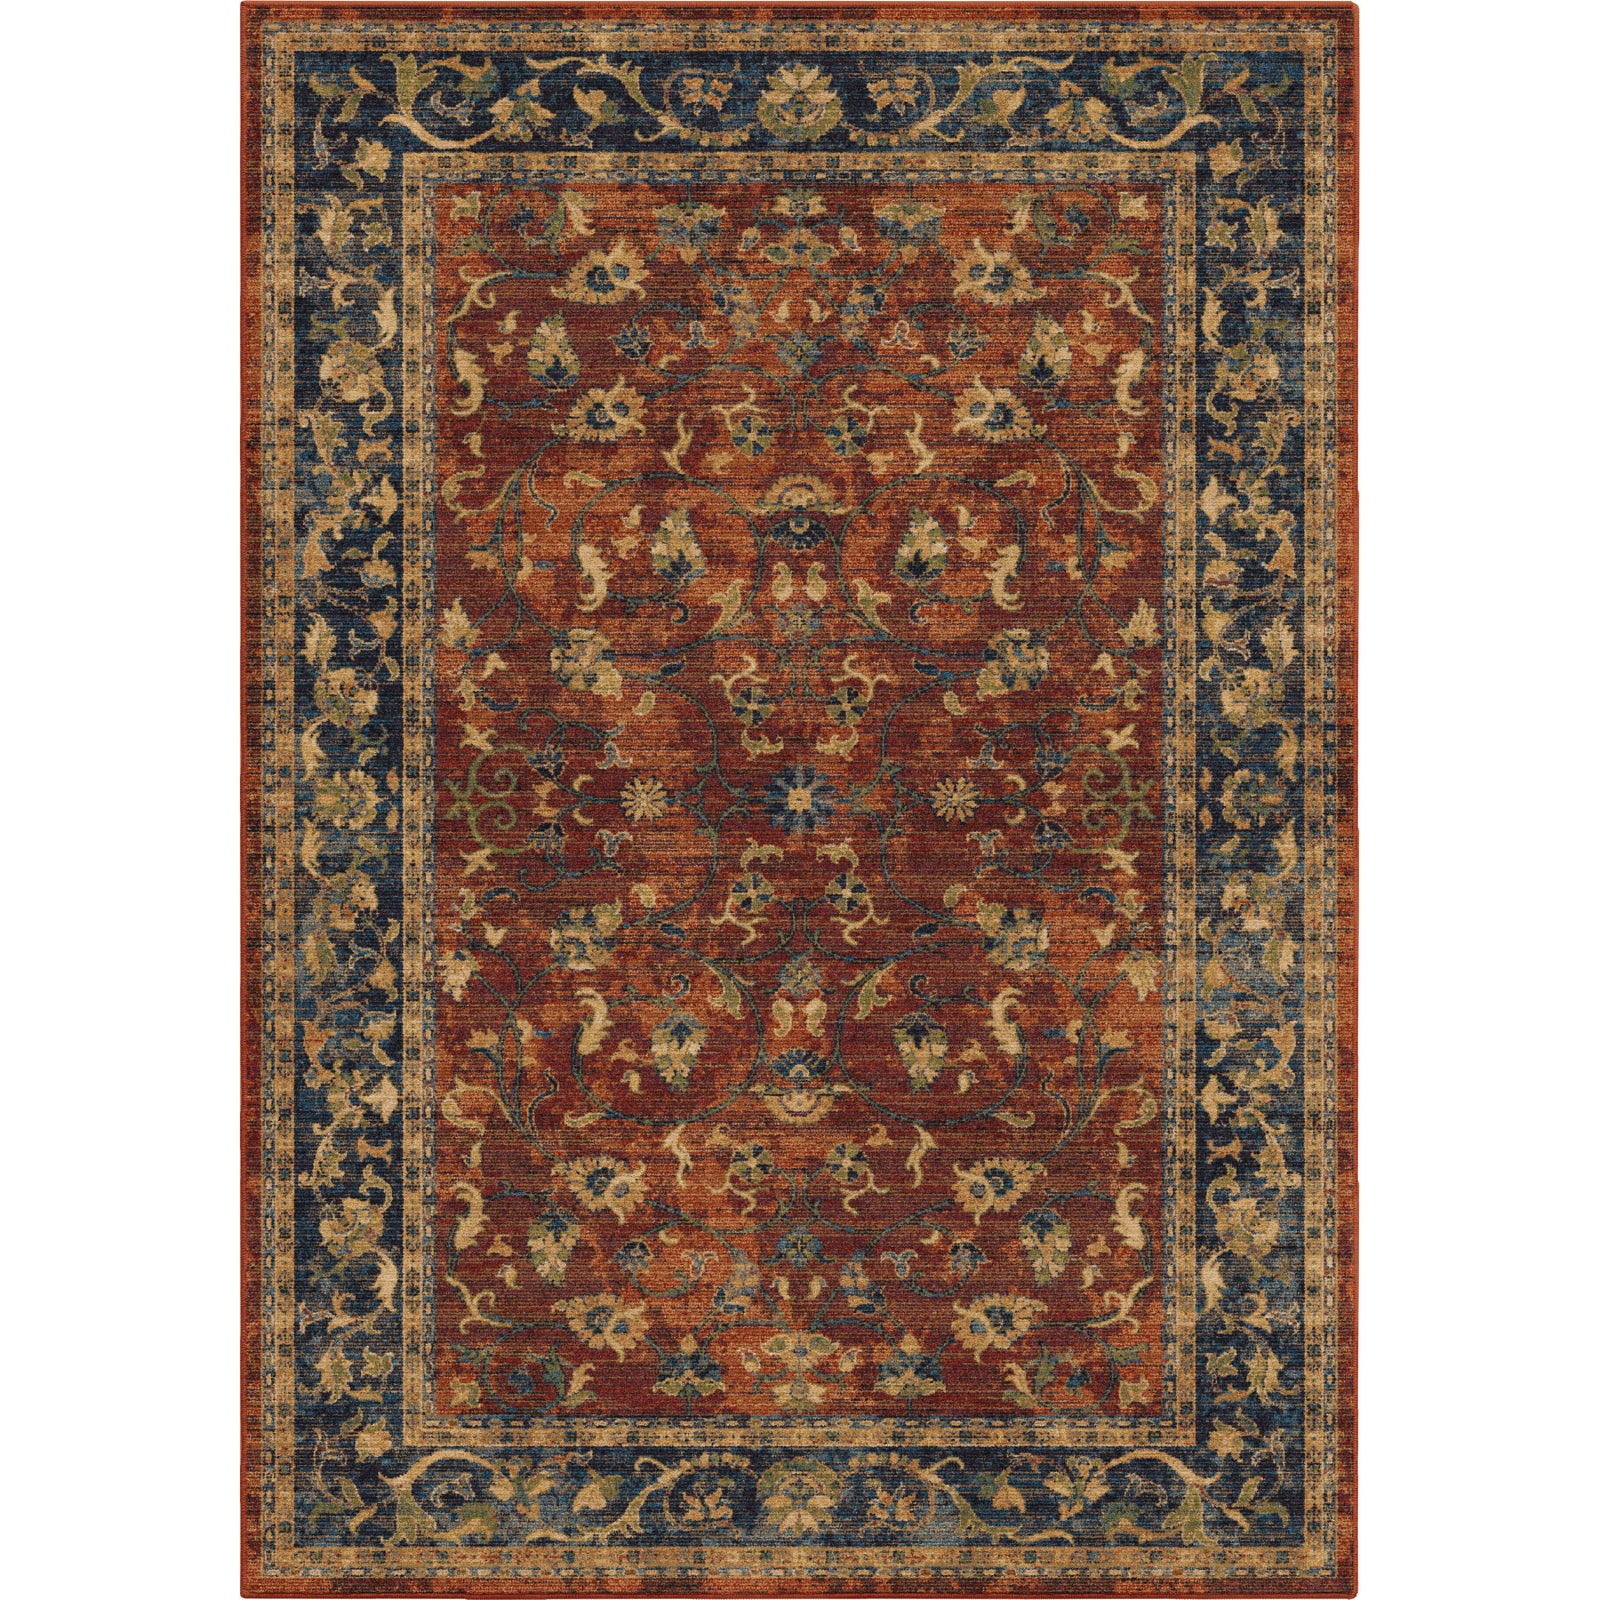 Orian Rugs Mosaic Floral Trail Red Area Rug main image